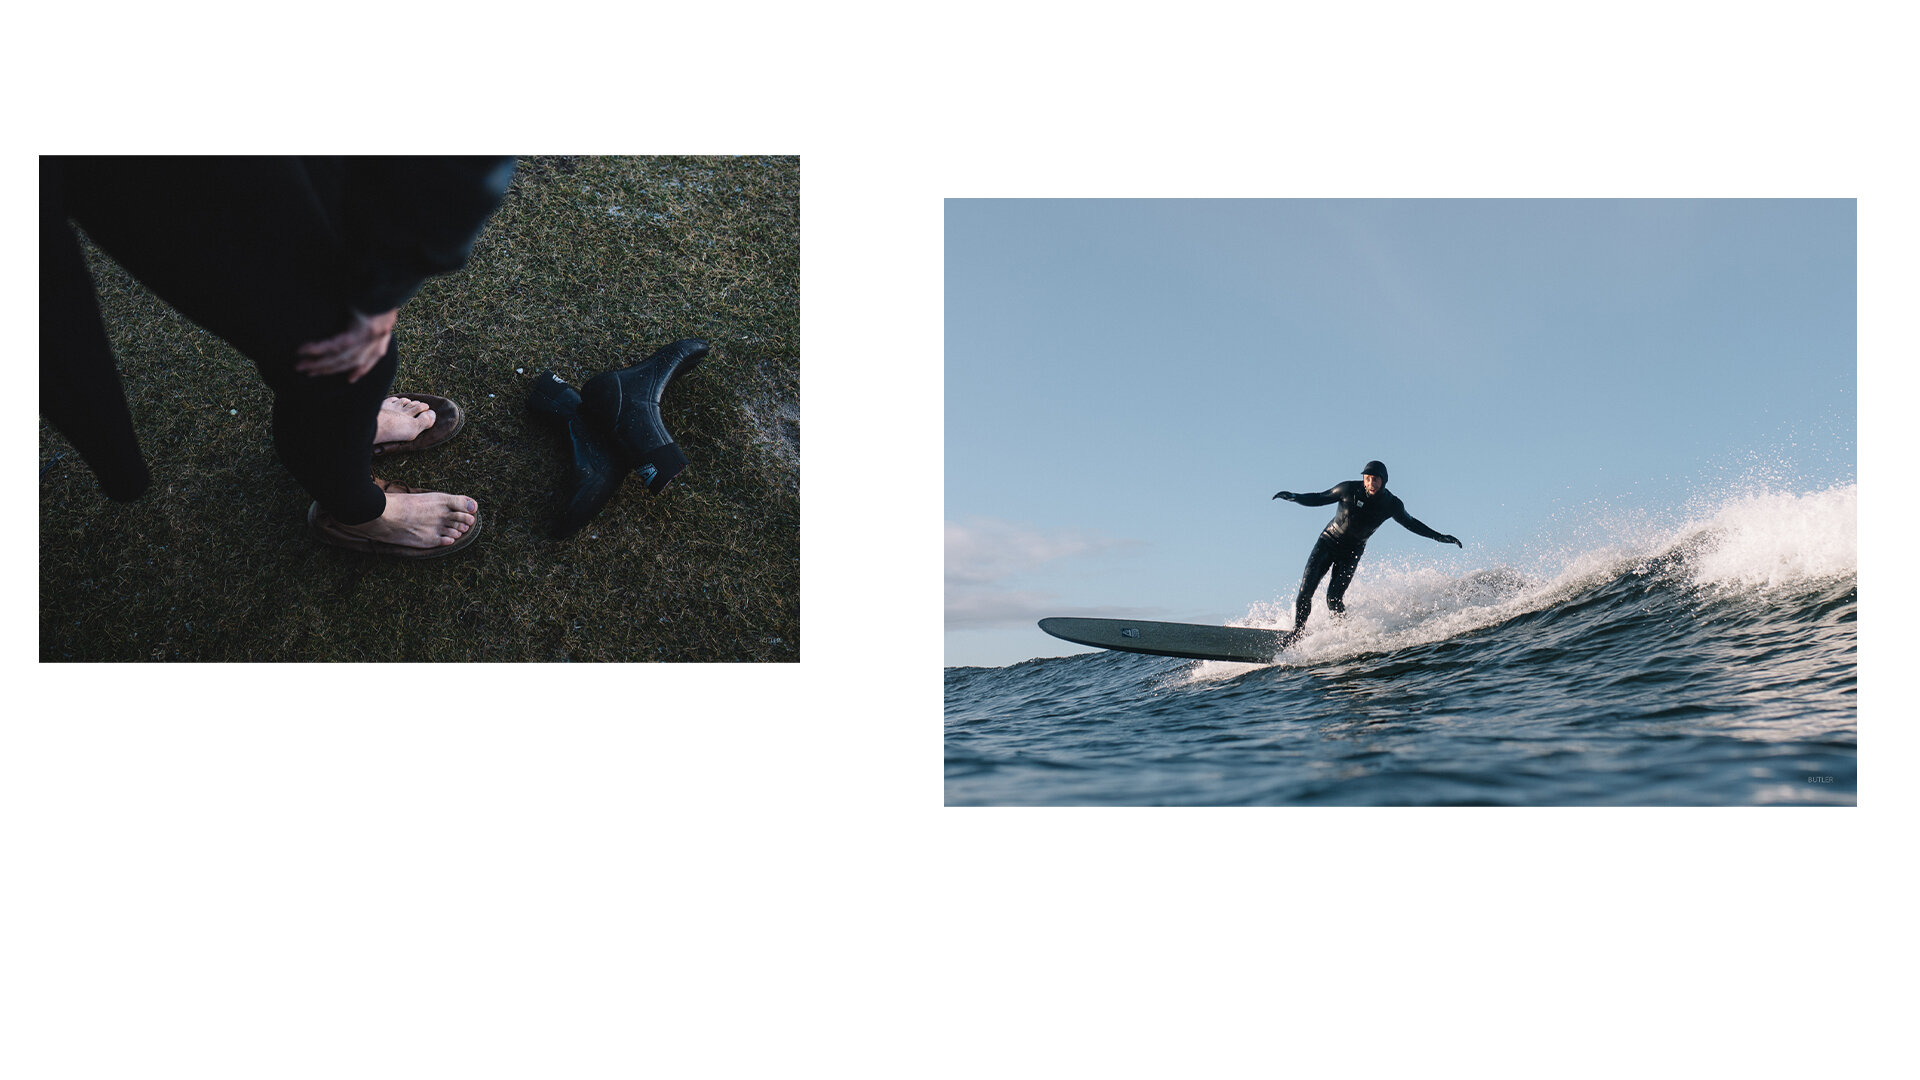 toby-butler-photographer-photography-scotland-surfing-surf-landscape-travelmikelay-mike-lay-hebrides-colinmacleod-musician-island-longboarder-photographer-ocean-north-photo-surfer-earth-climate-wild-2.jpg